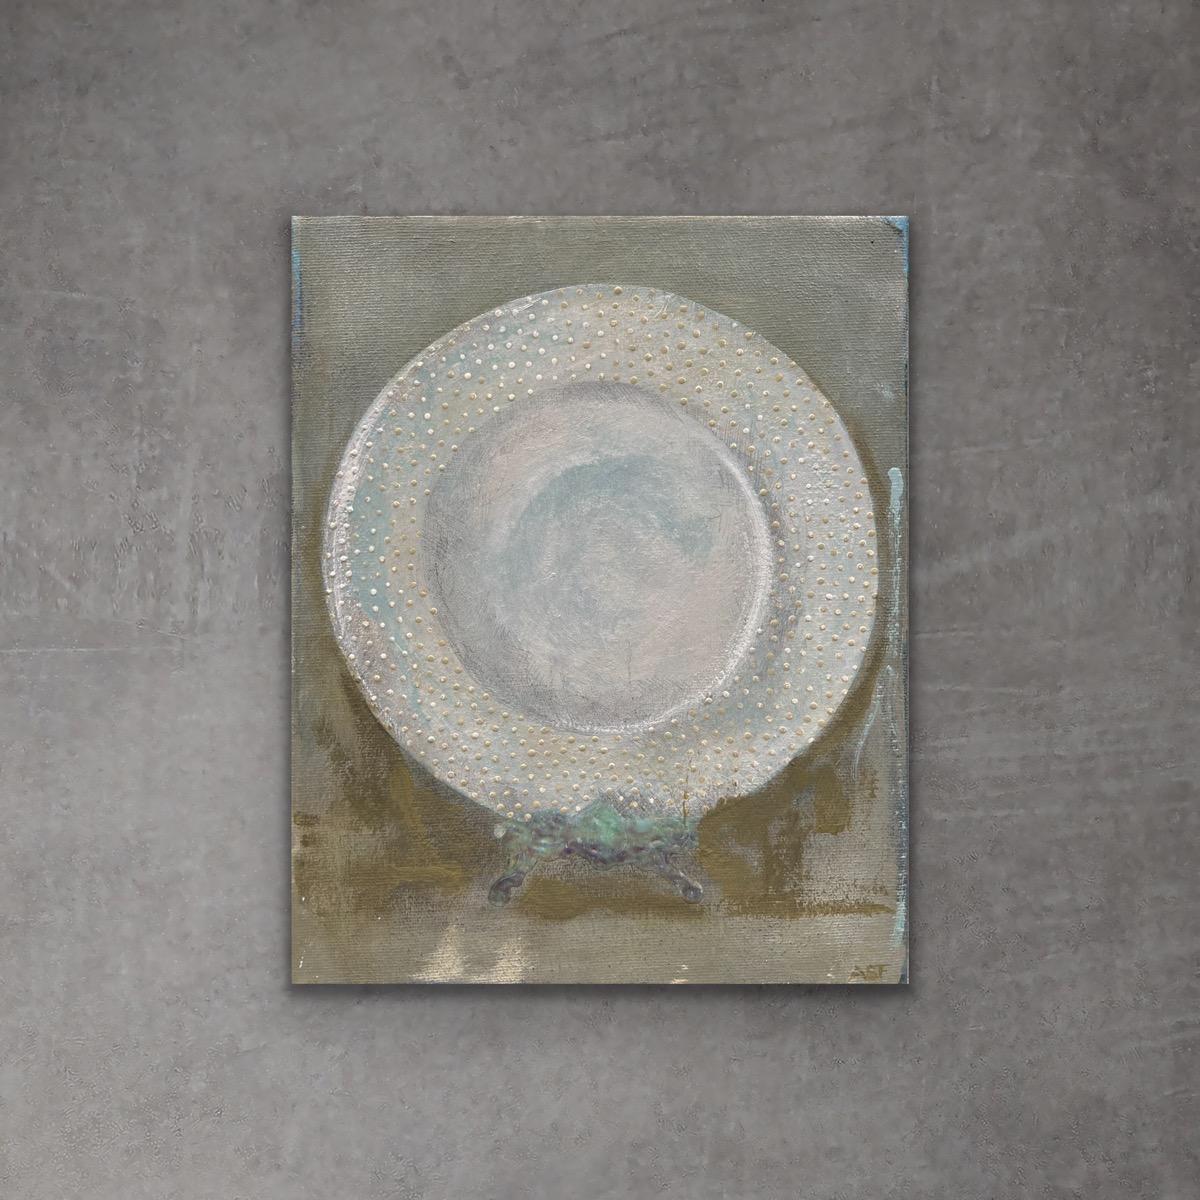 Dinner Plate 3 - 8"x10", Still Life Painting, Neutral, White, Muted Green